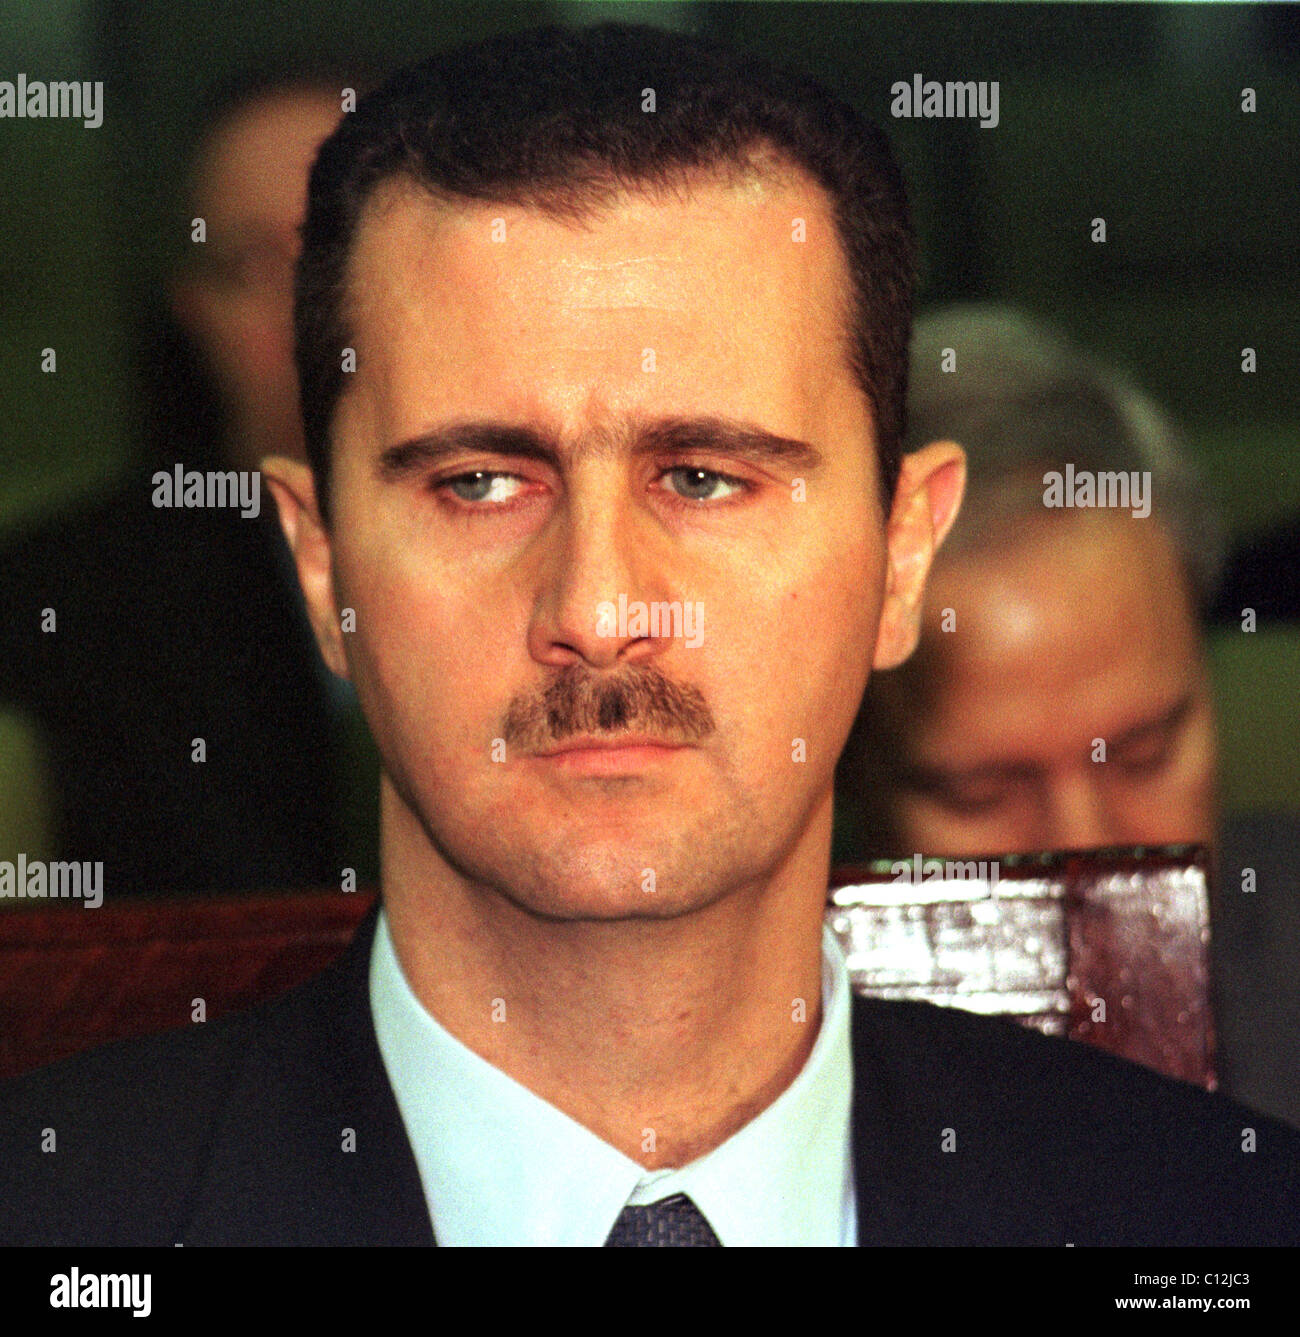 CAIRO, EGYPT -- 22 OCT 2000 -- SYRIAN PRESIDENT BASHAR EL-ASSAD, AT A SESSION OF THE ARAB LEAGUE EMERGENCY SUMMIT. Stock Photo